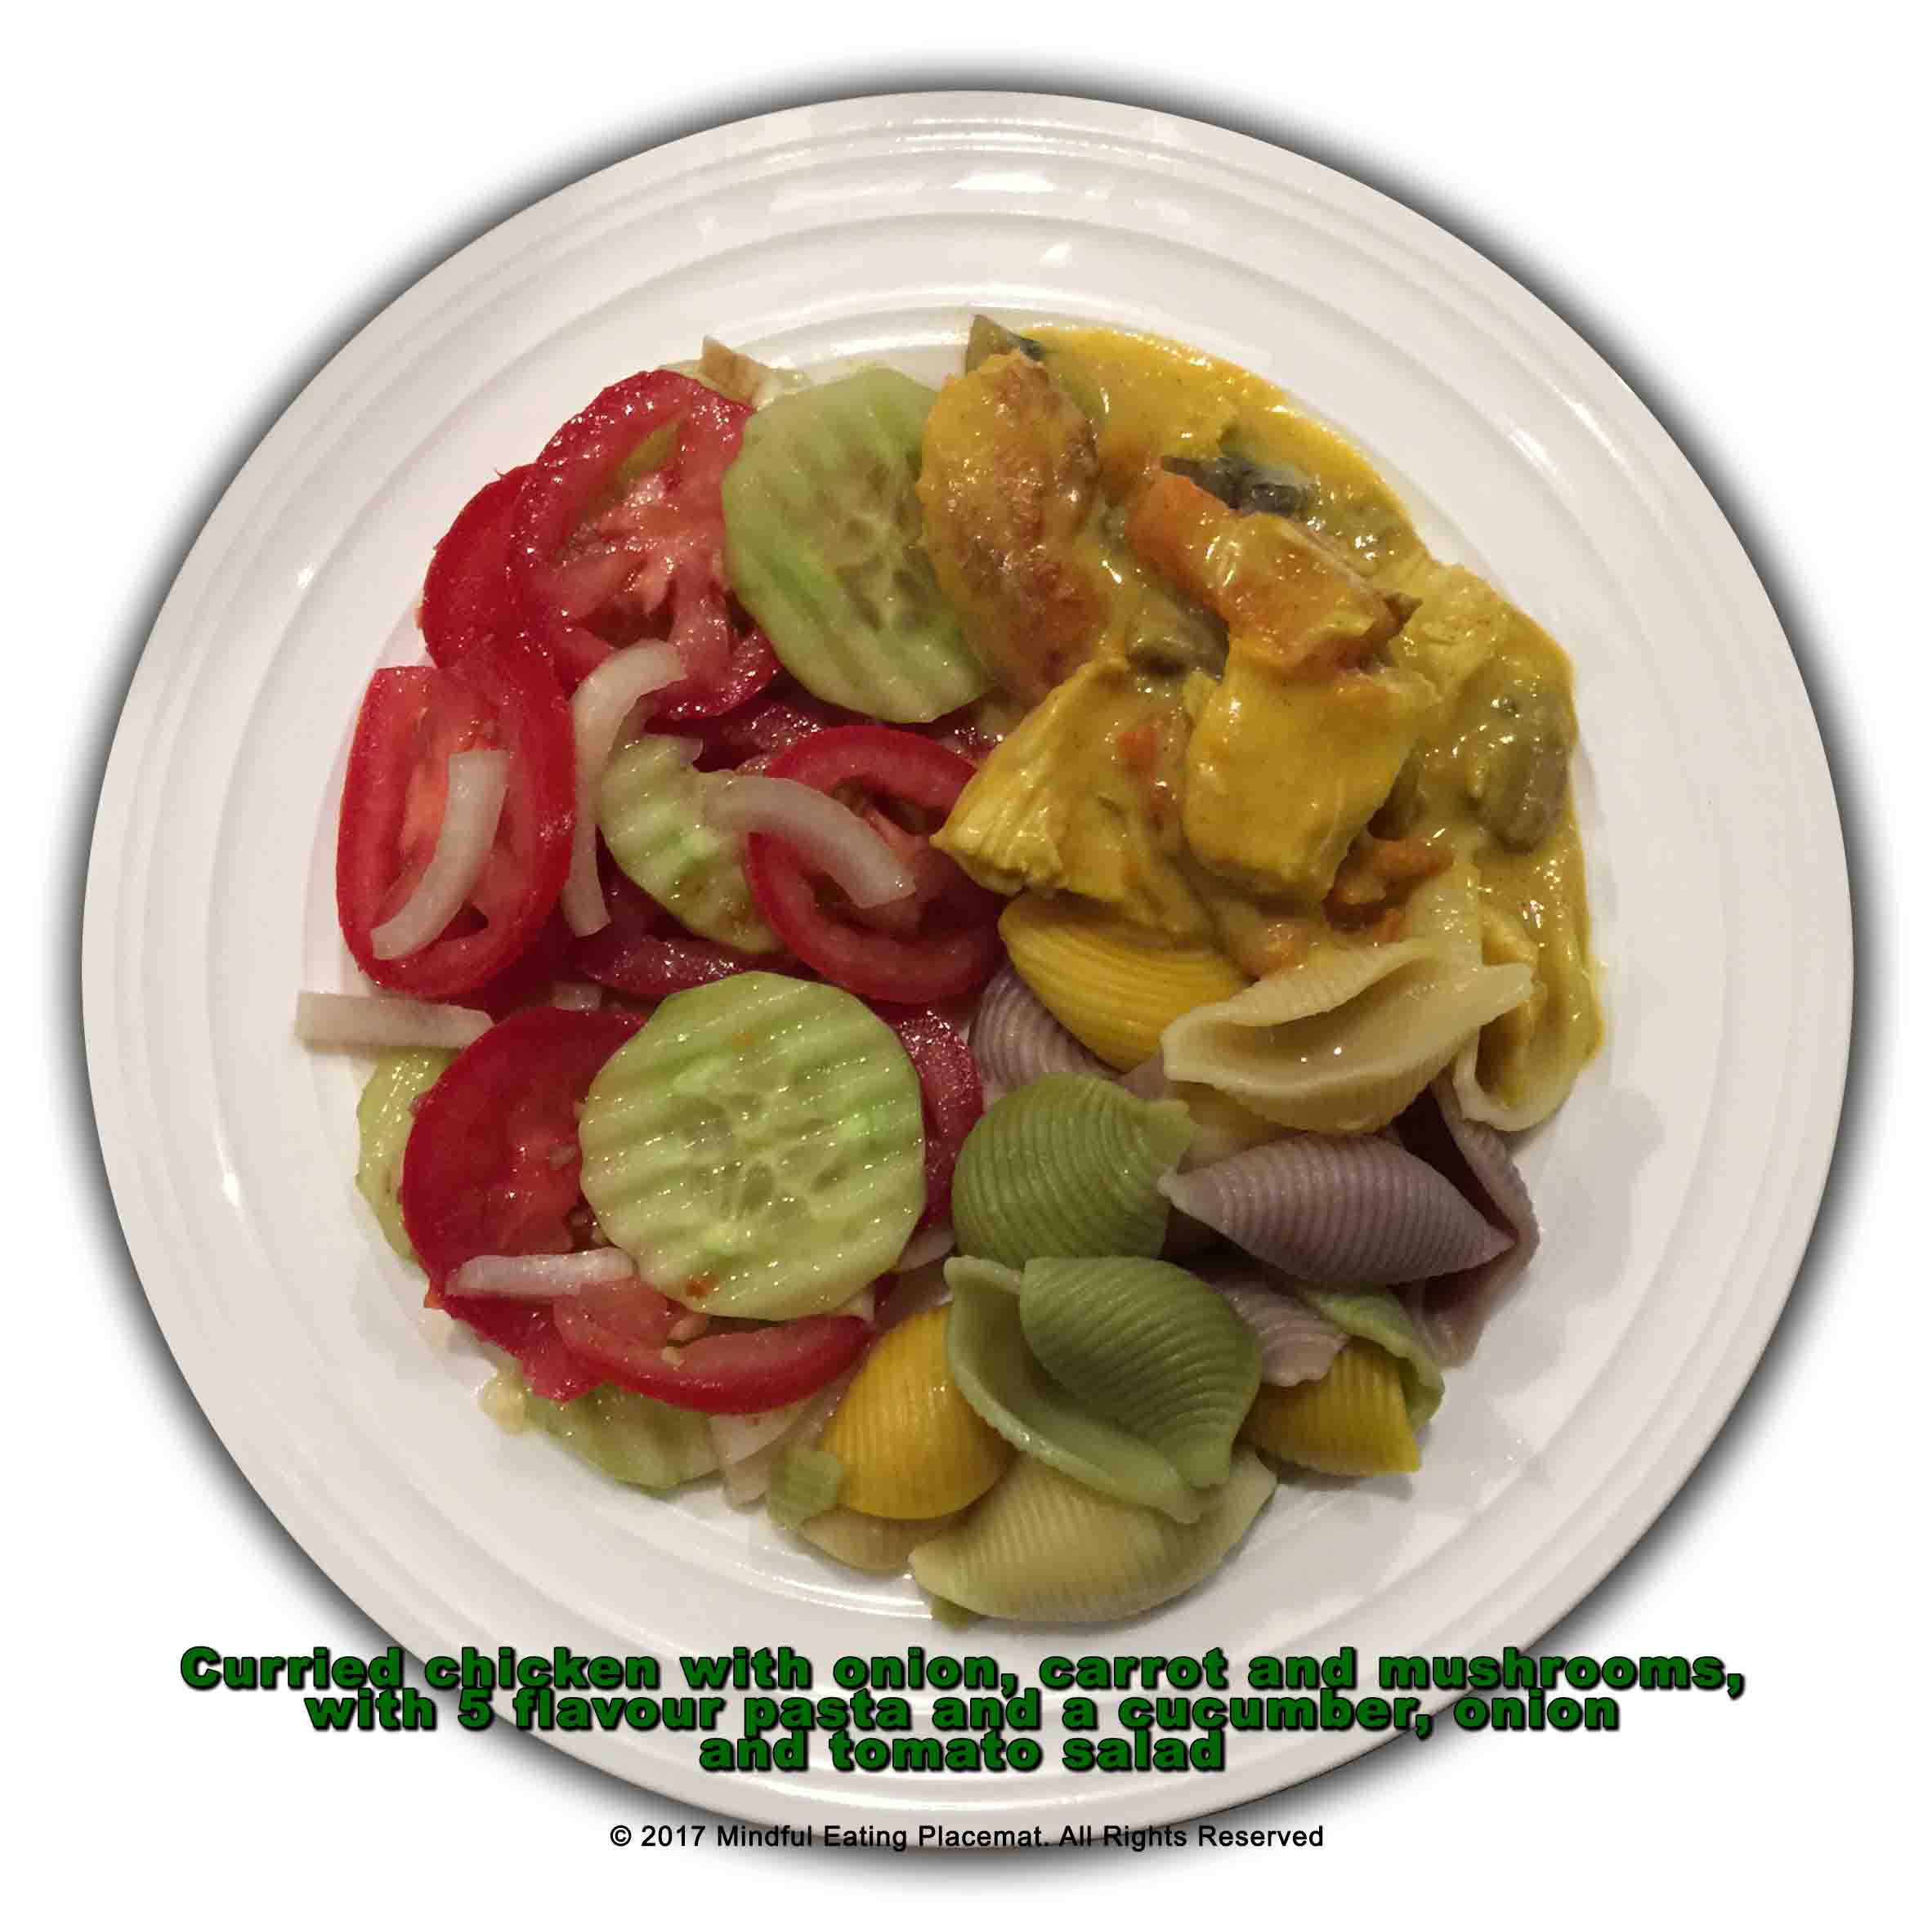 Chicken curry with pasta and tomato, cucumber salad